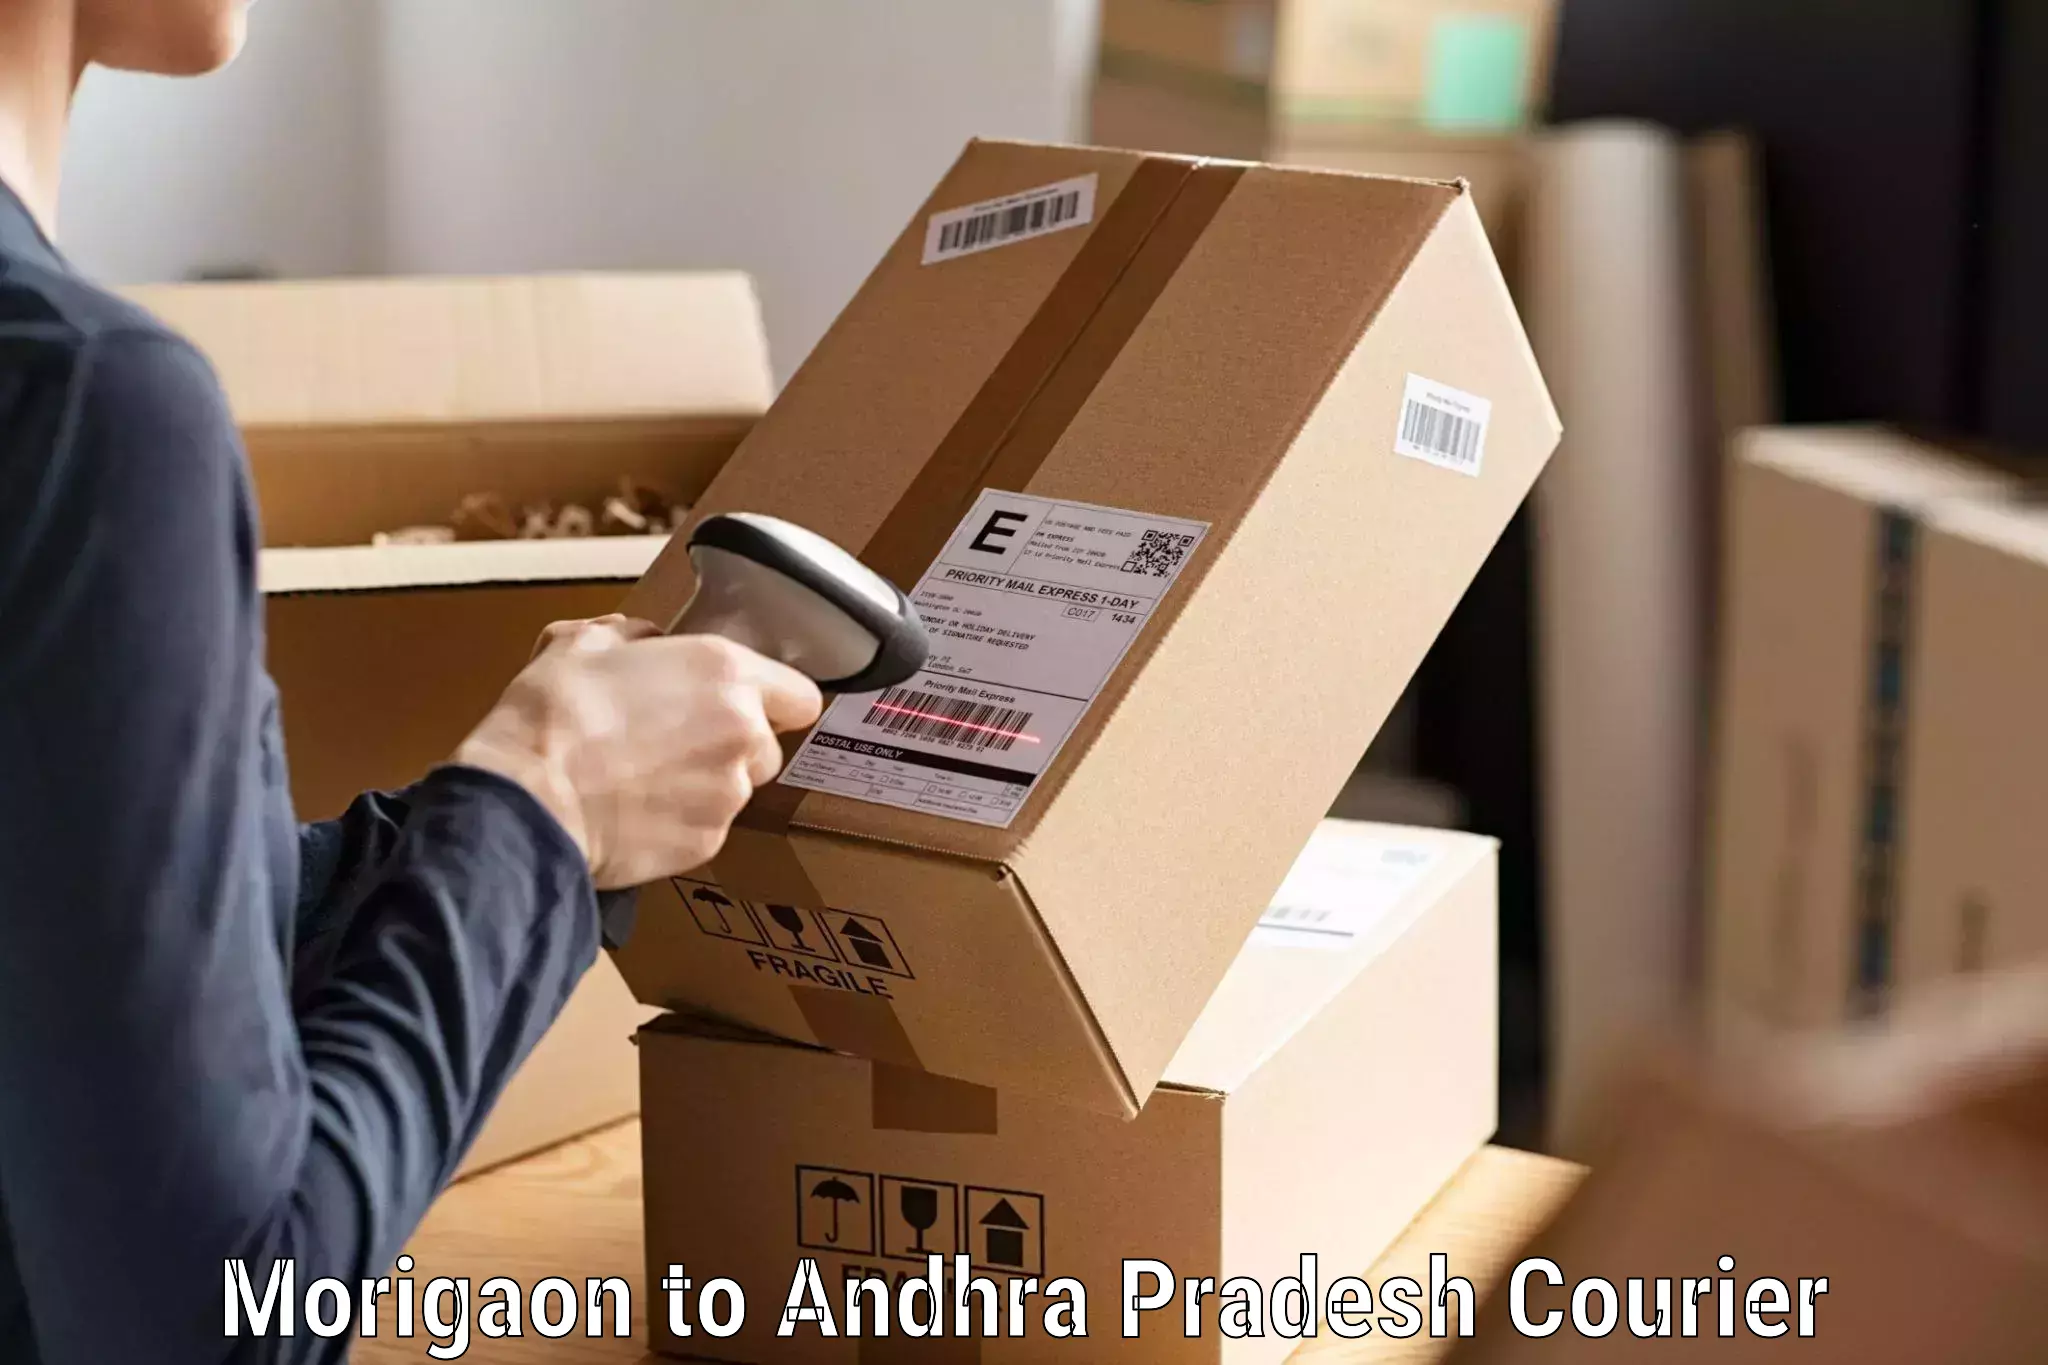 User-friendly delivery service Morigaon to Changaroth